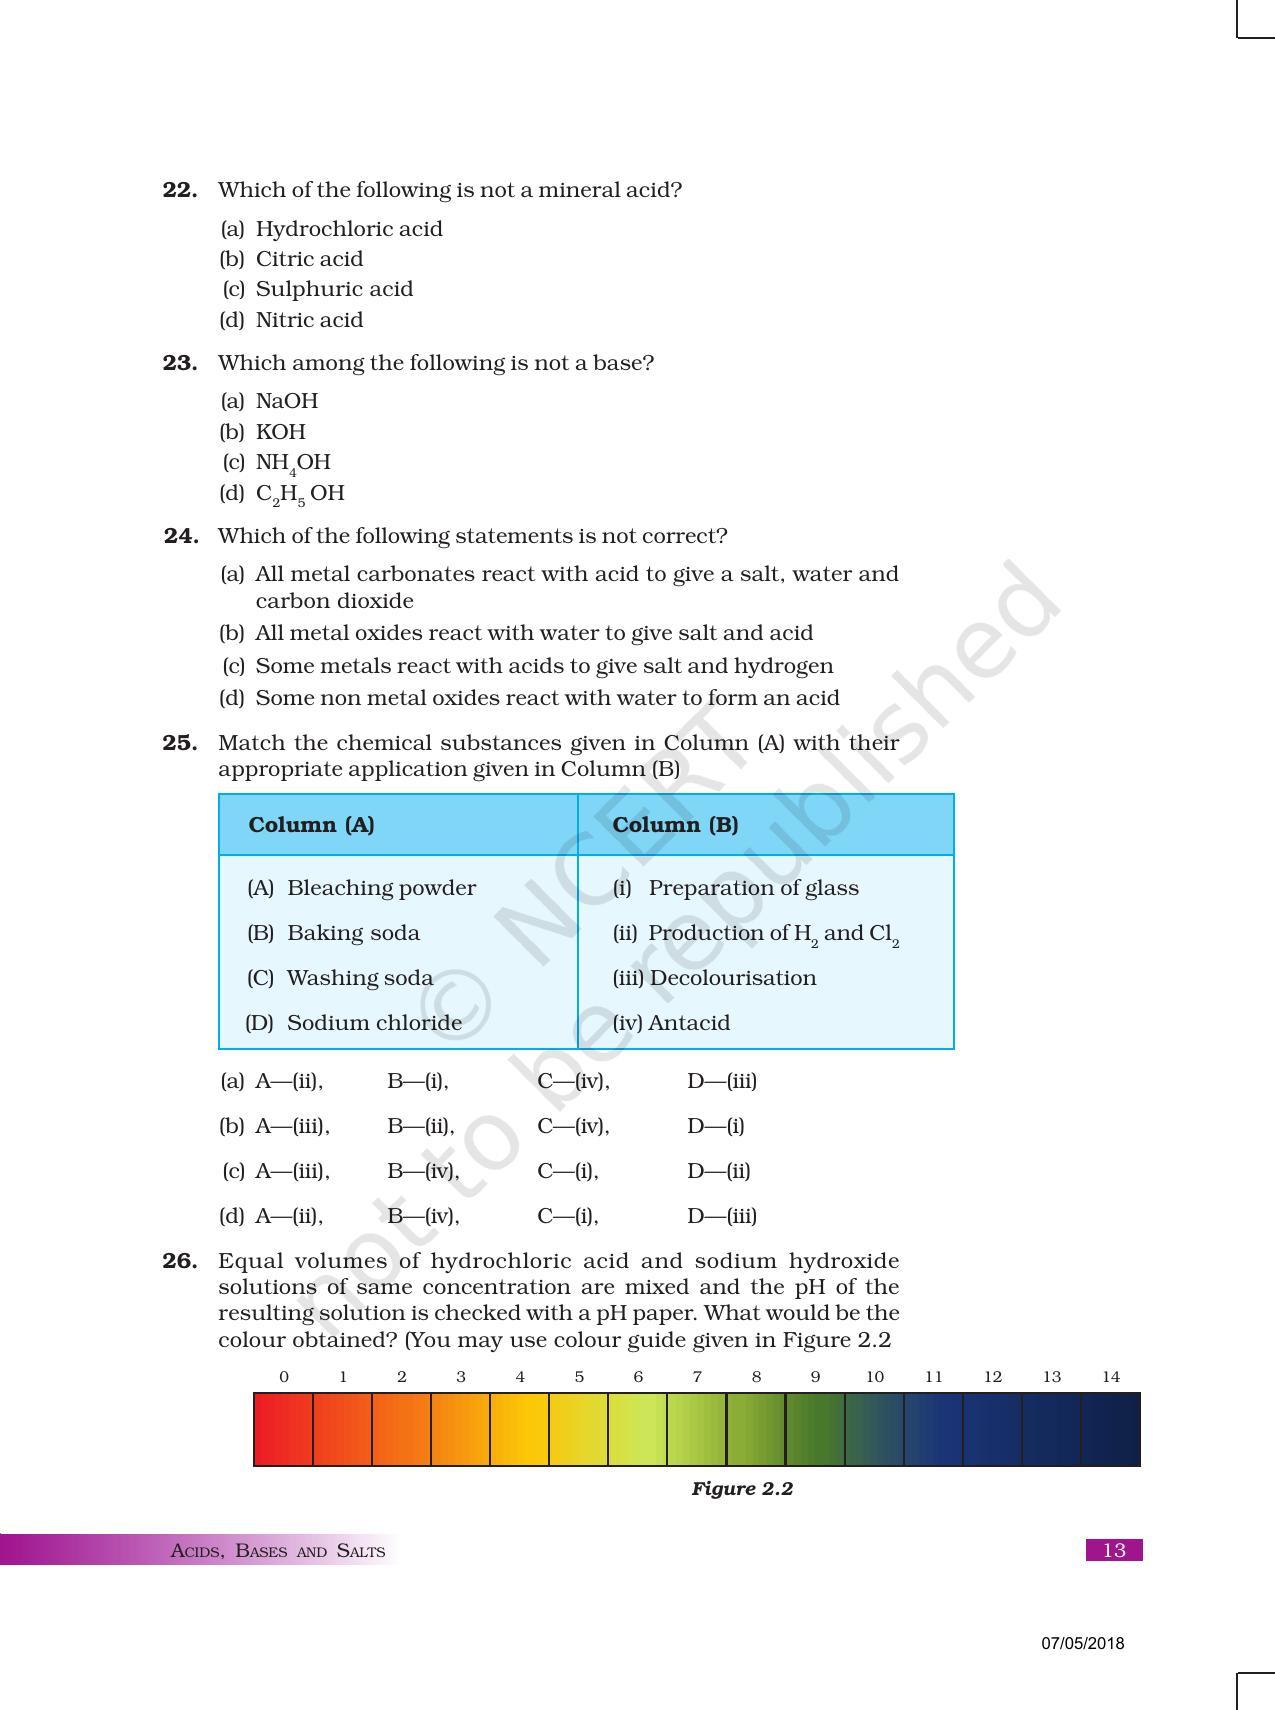 NCERT Exemplar Book for Class 10 Science: Chapter 2 Acids, Bases, and Salts - Page 5